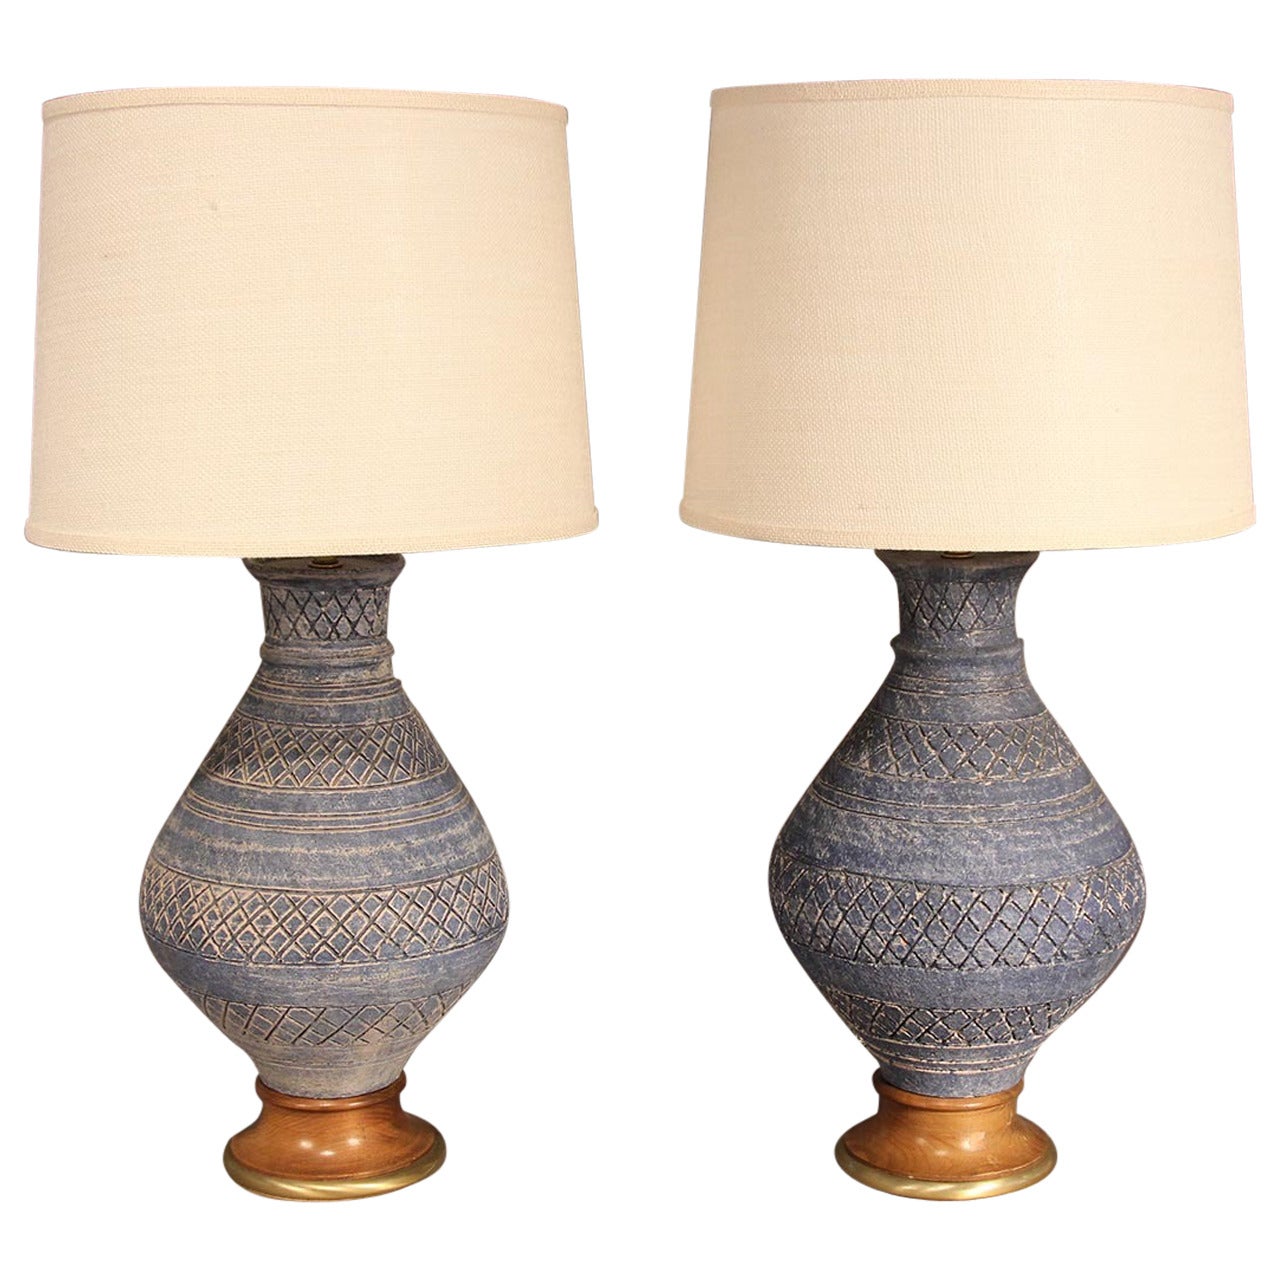 Pair of Mid-Century Pottery Table Lamps